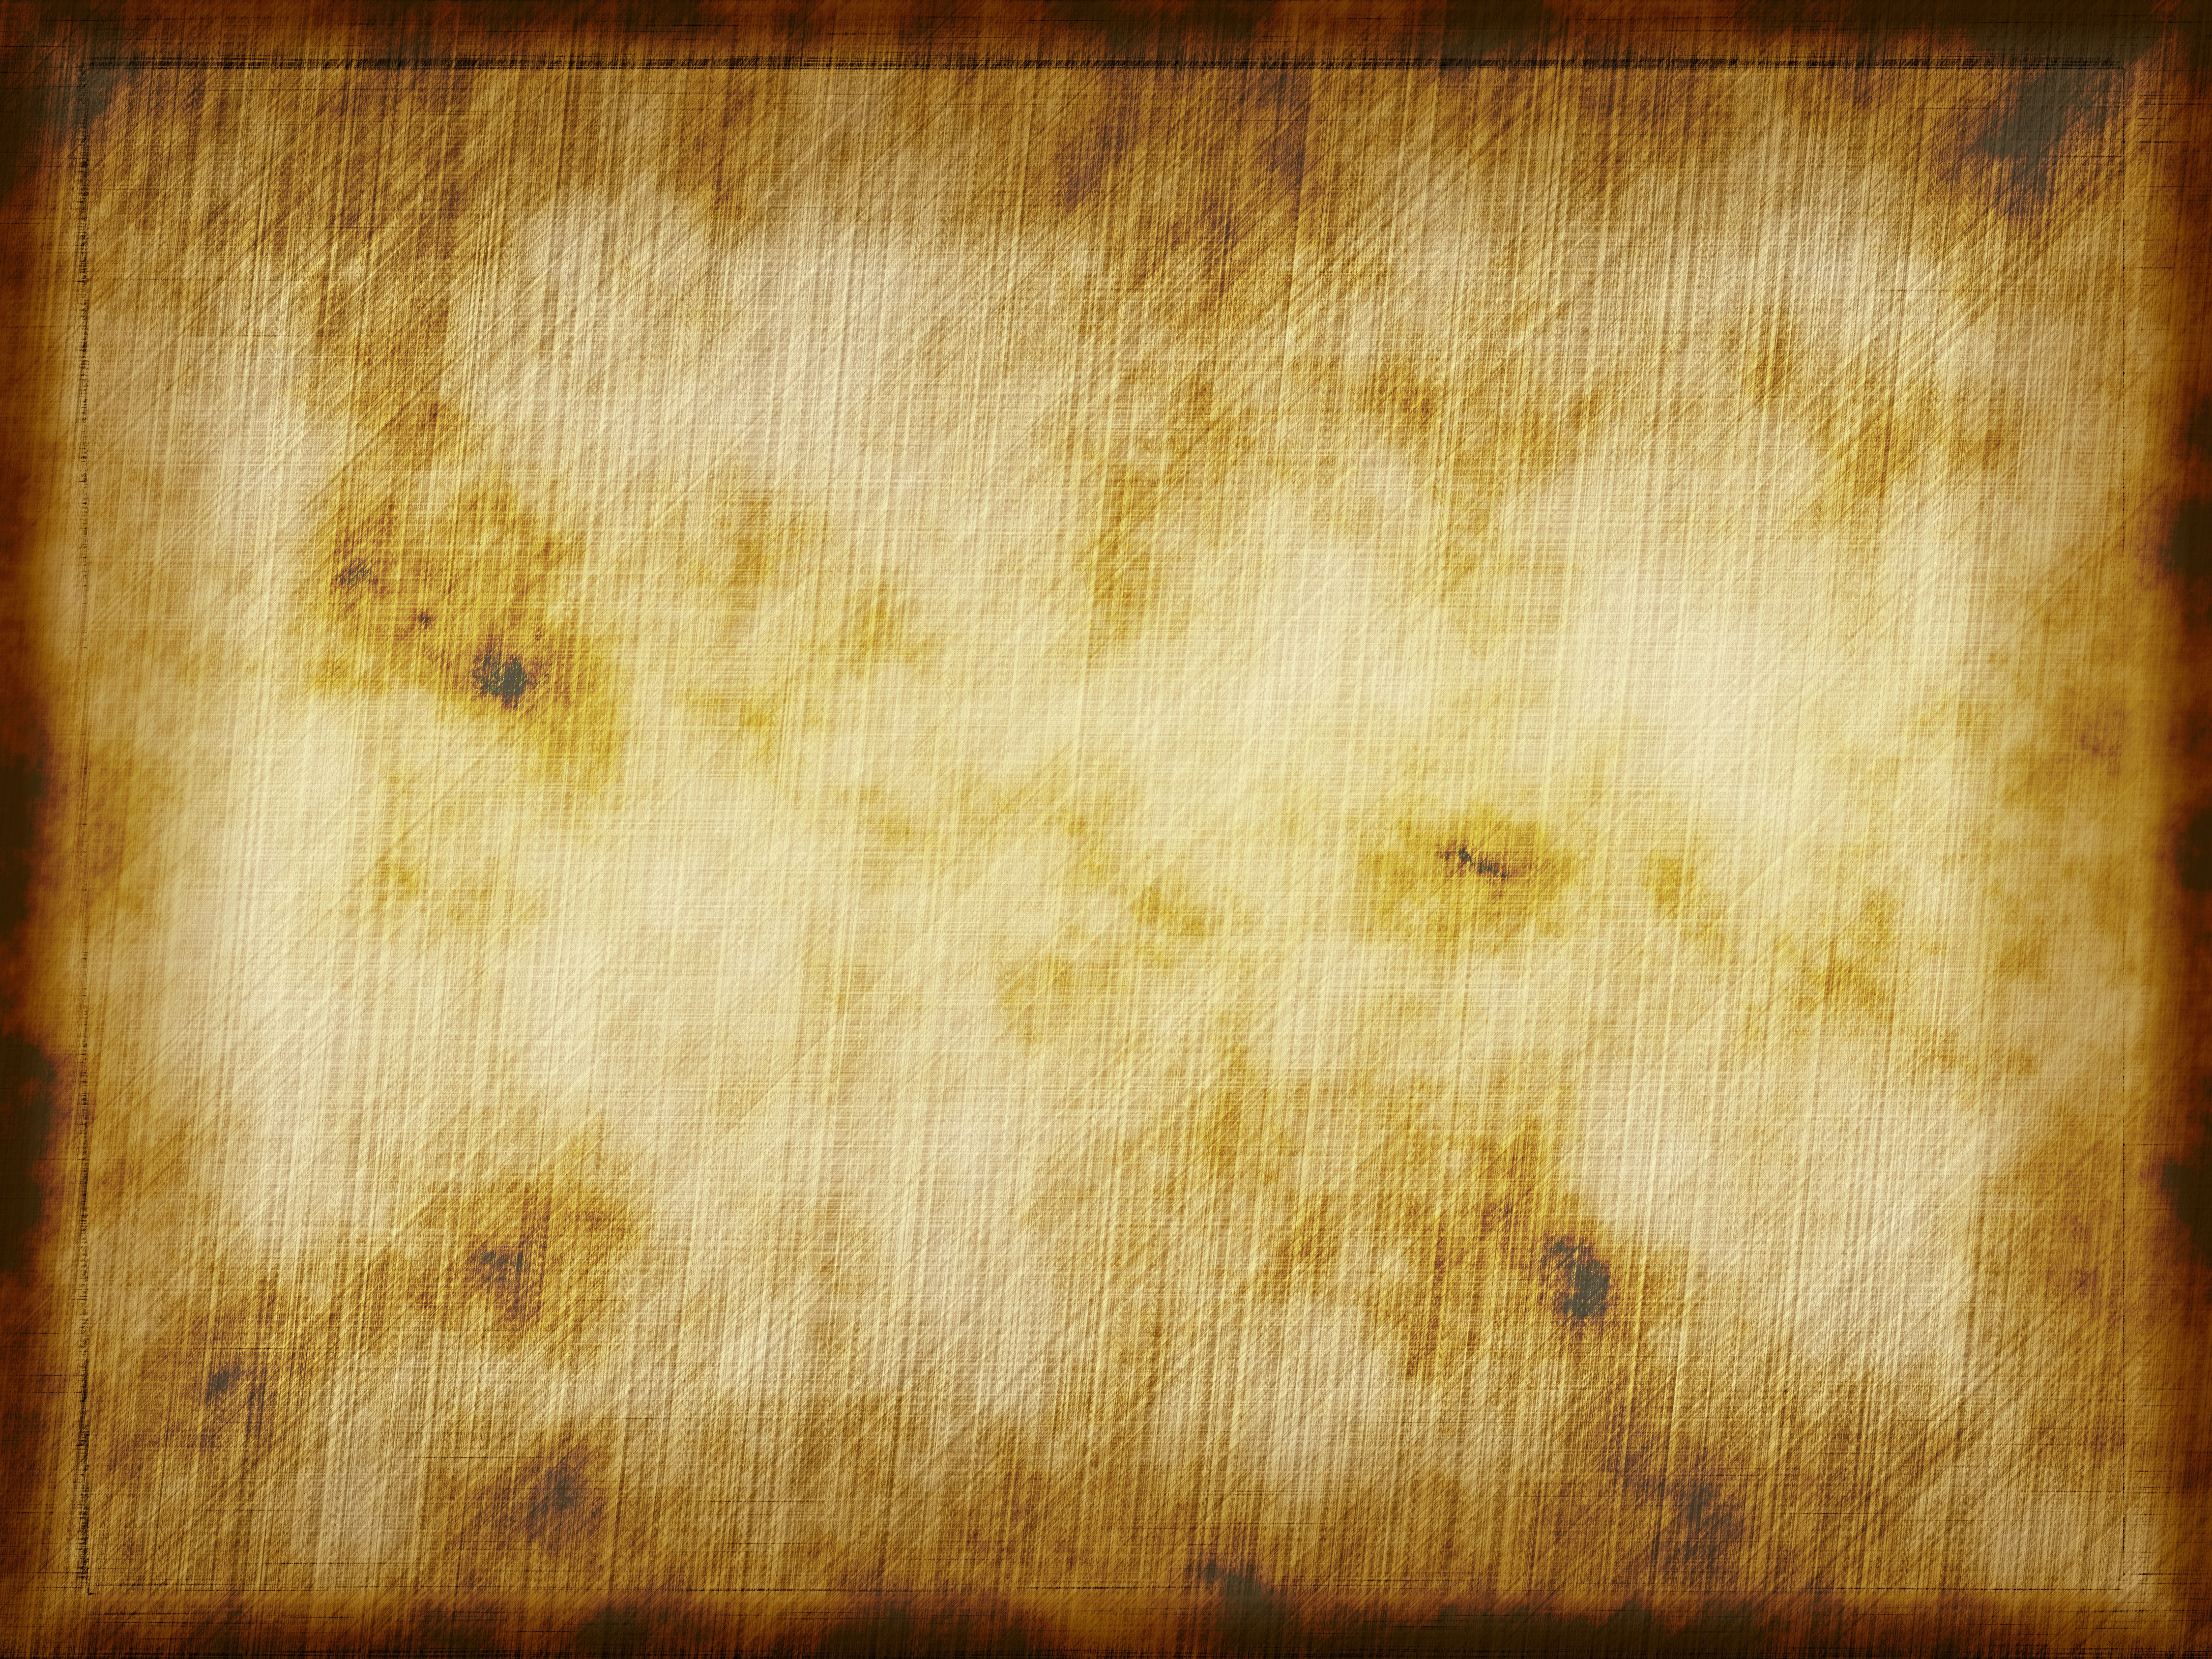 just an old and worn parchment paper background texture | www.myfreetextures.com | Free Textures ...